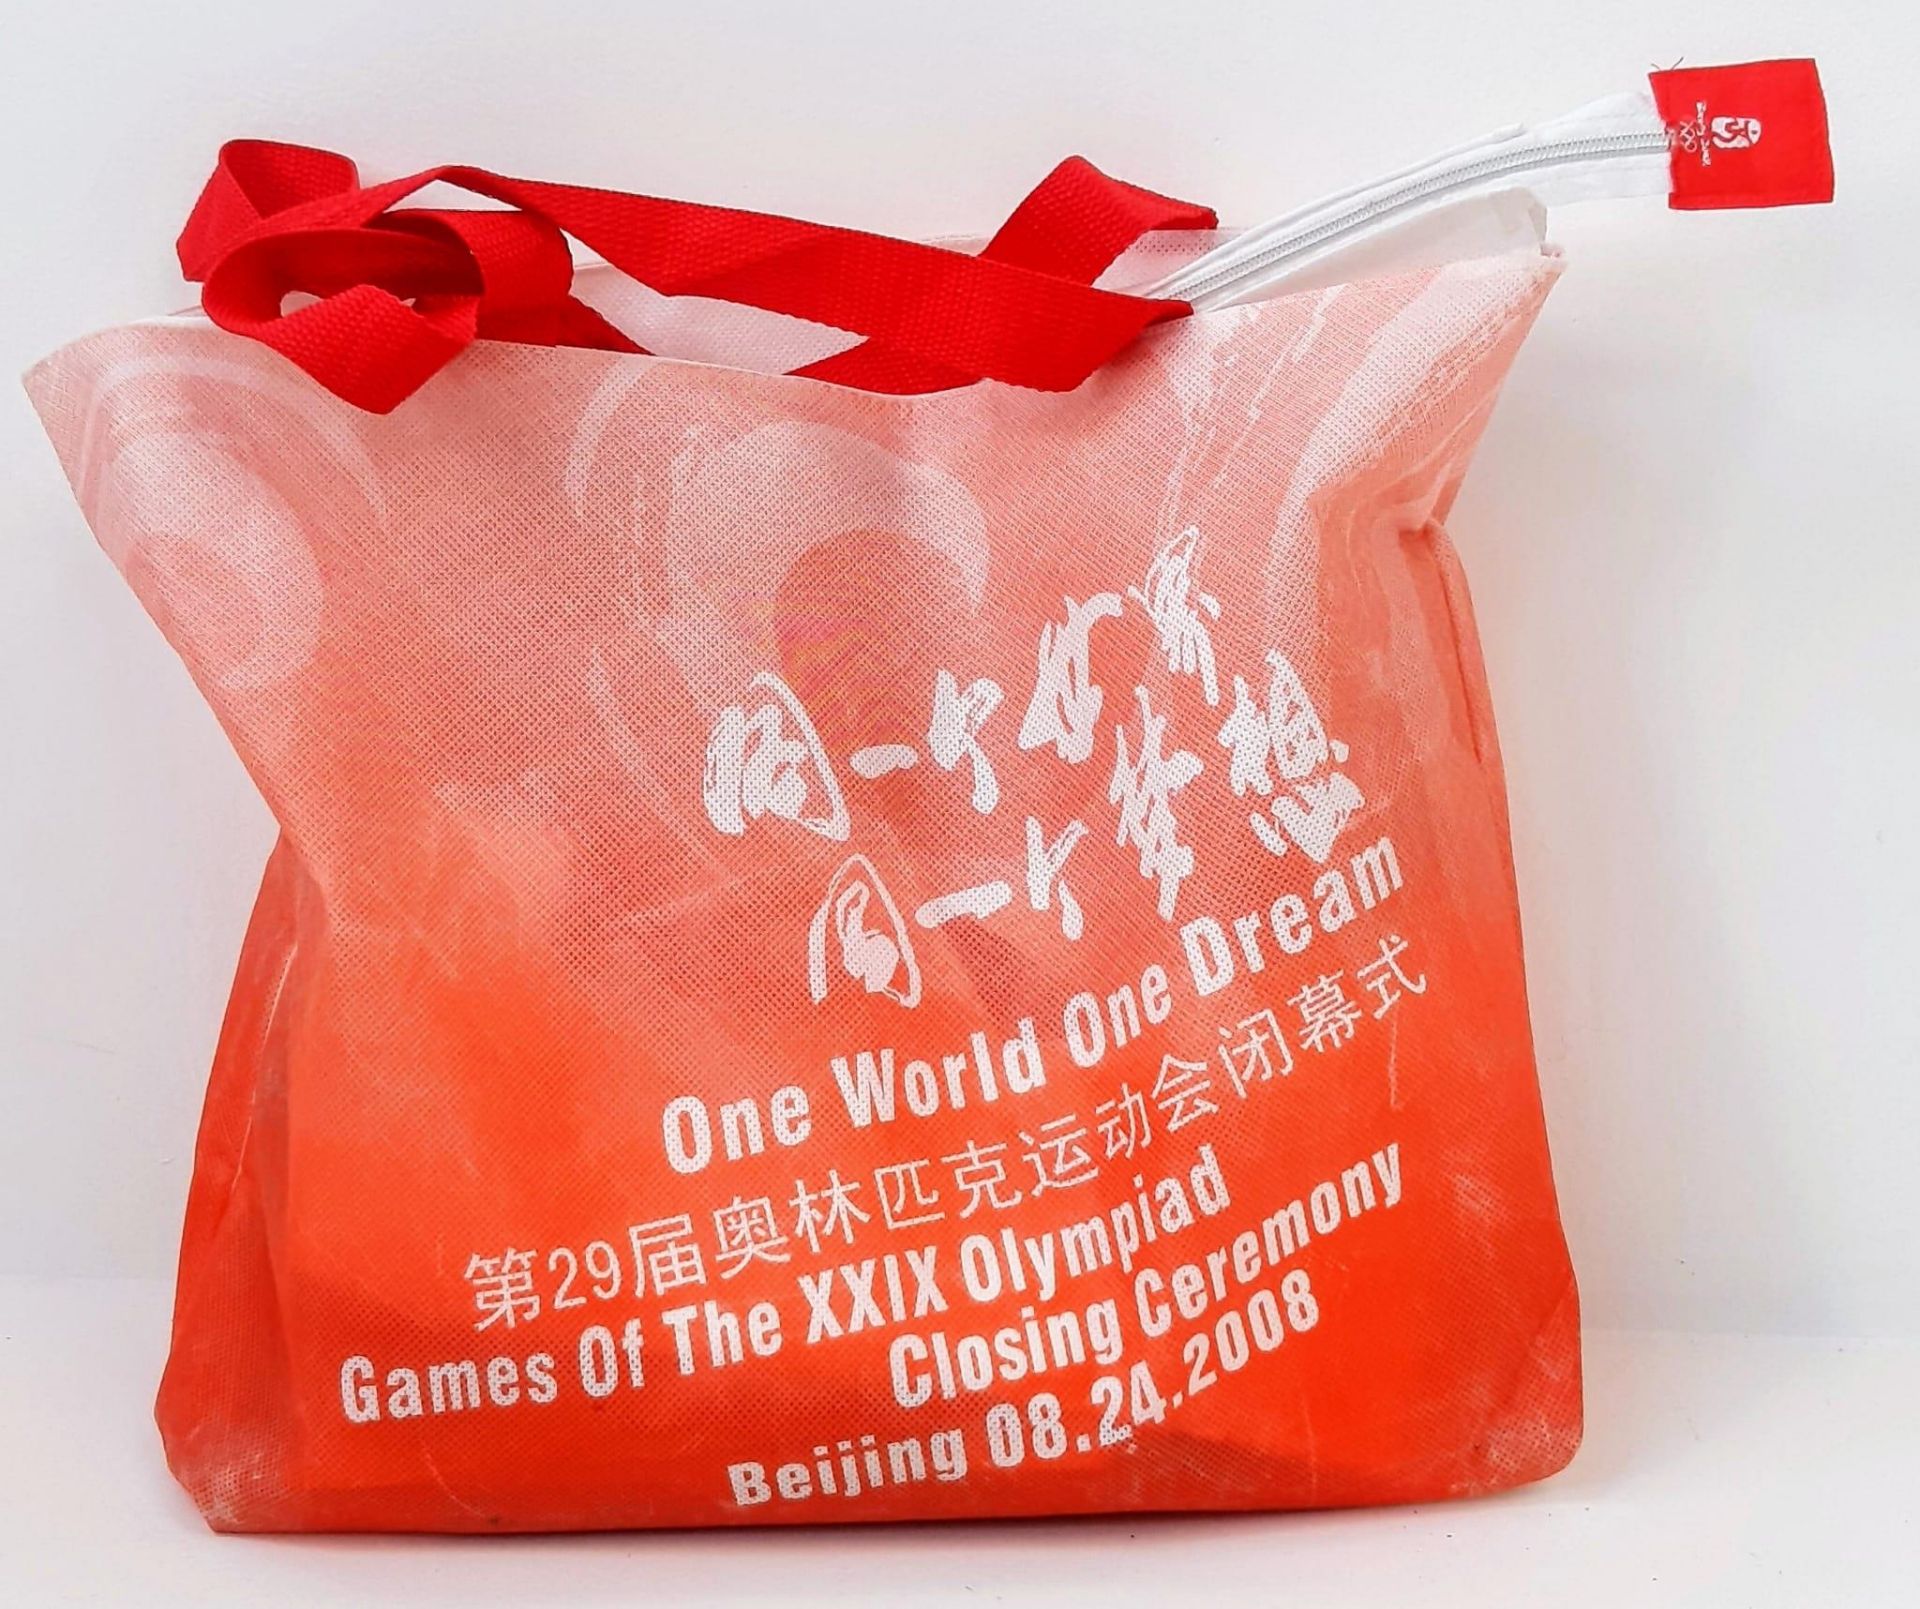 A Beijing 2008 Olympics Press/Media Pack. Includes tickets, brochures and other collectibles. - Image 11 of 12